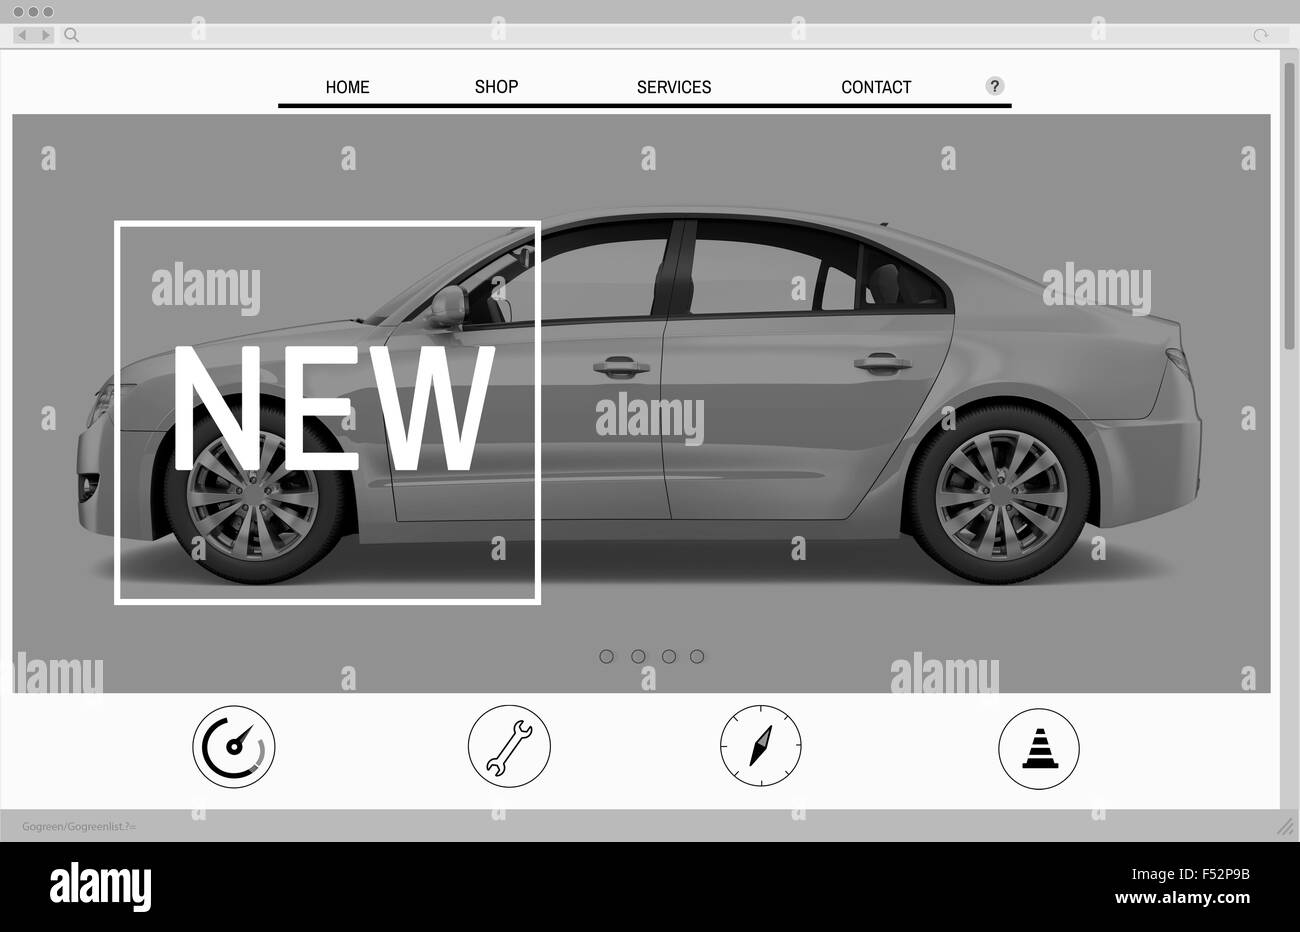 Website Advertising Car Homepage New Arrival Concept Stock Photo